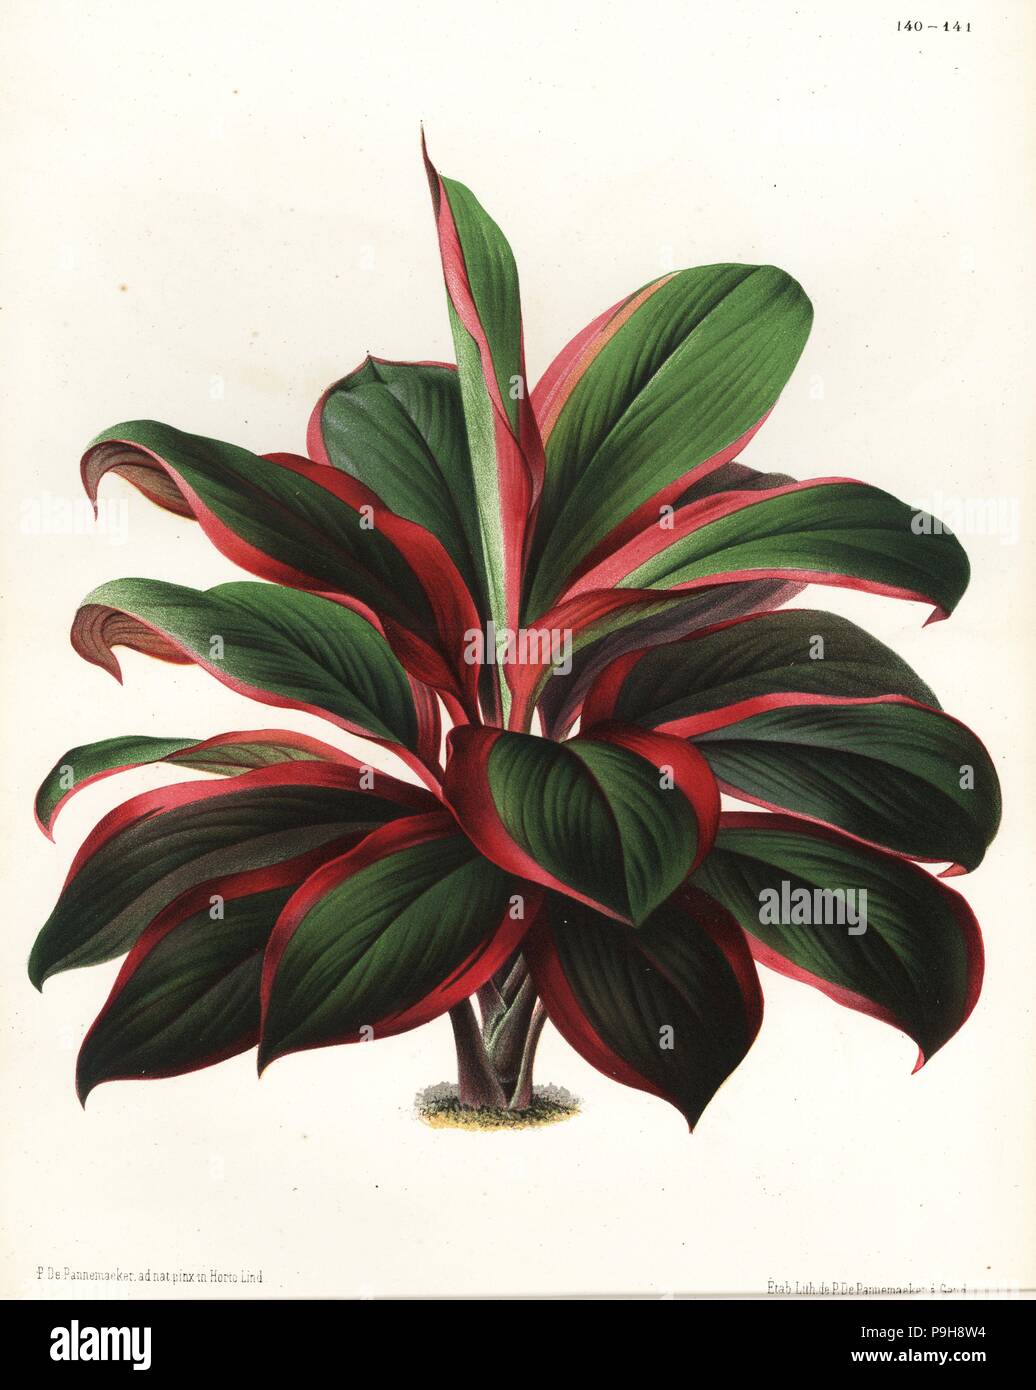 Cabbage palm tree, Cordyline fruticosa (Dracaena reali). Drawn and chromolithographed by P. de Pannemaeker from Jean Linden's l'Illustration Horticole, Brussels, 1873. Stock Photo